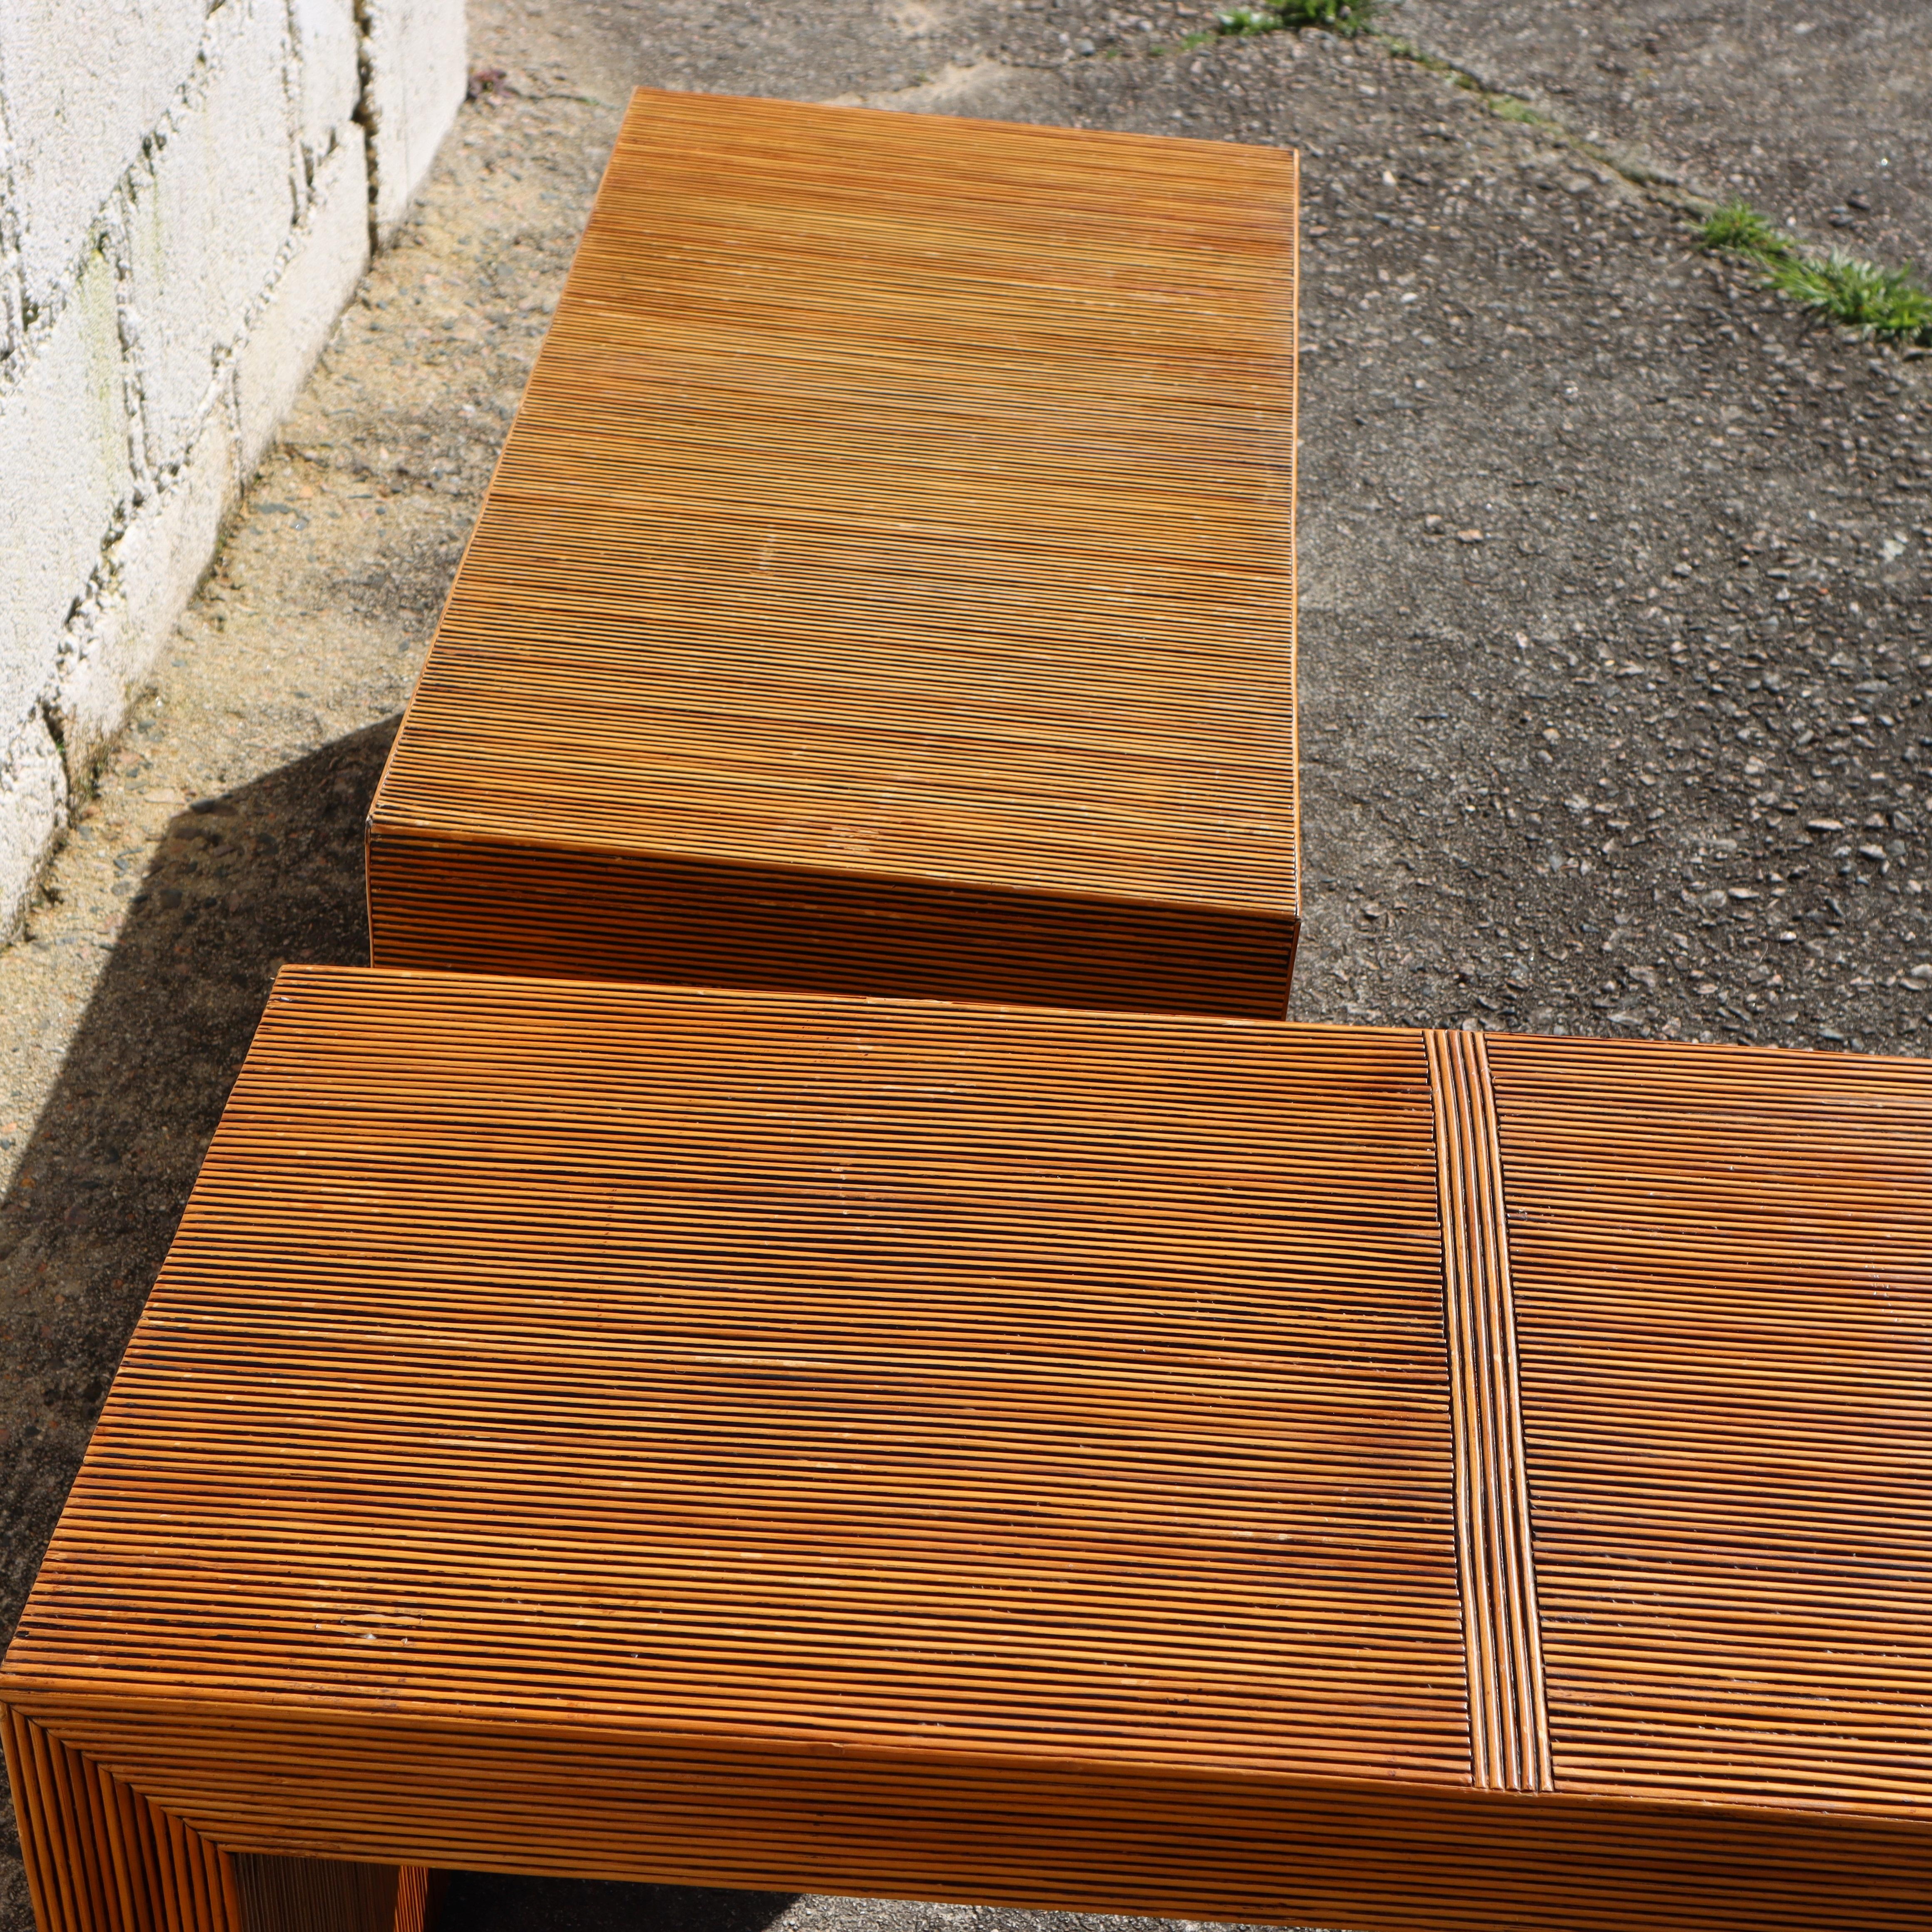 2 Vintage Rattan Coffee Tables-Cuboid Lounge Tables-Set Patio Deck Tables-80s For Sale 4